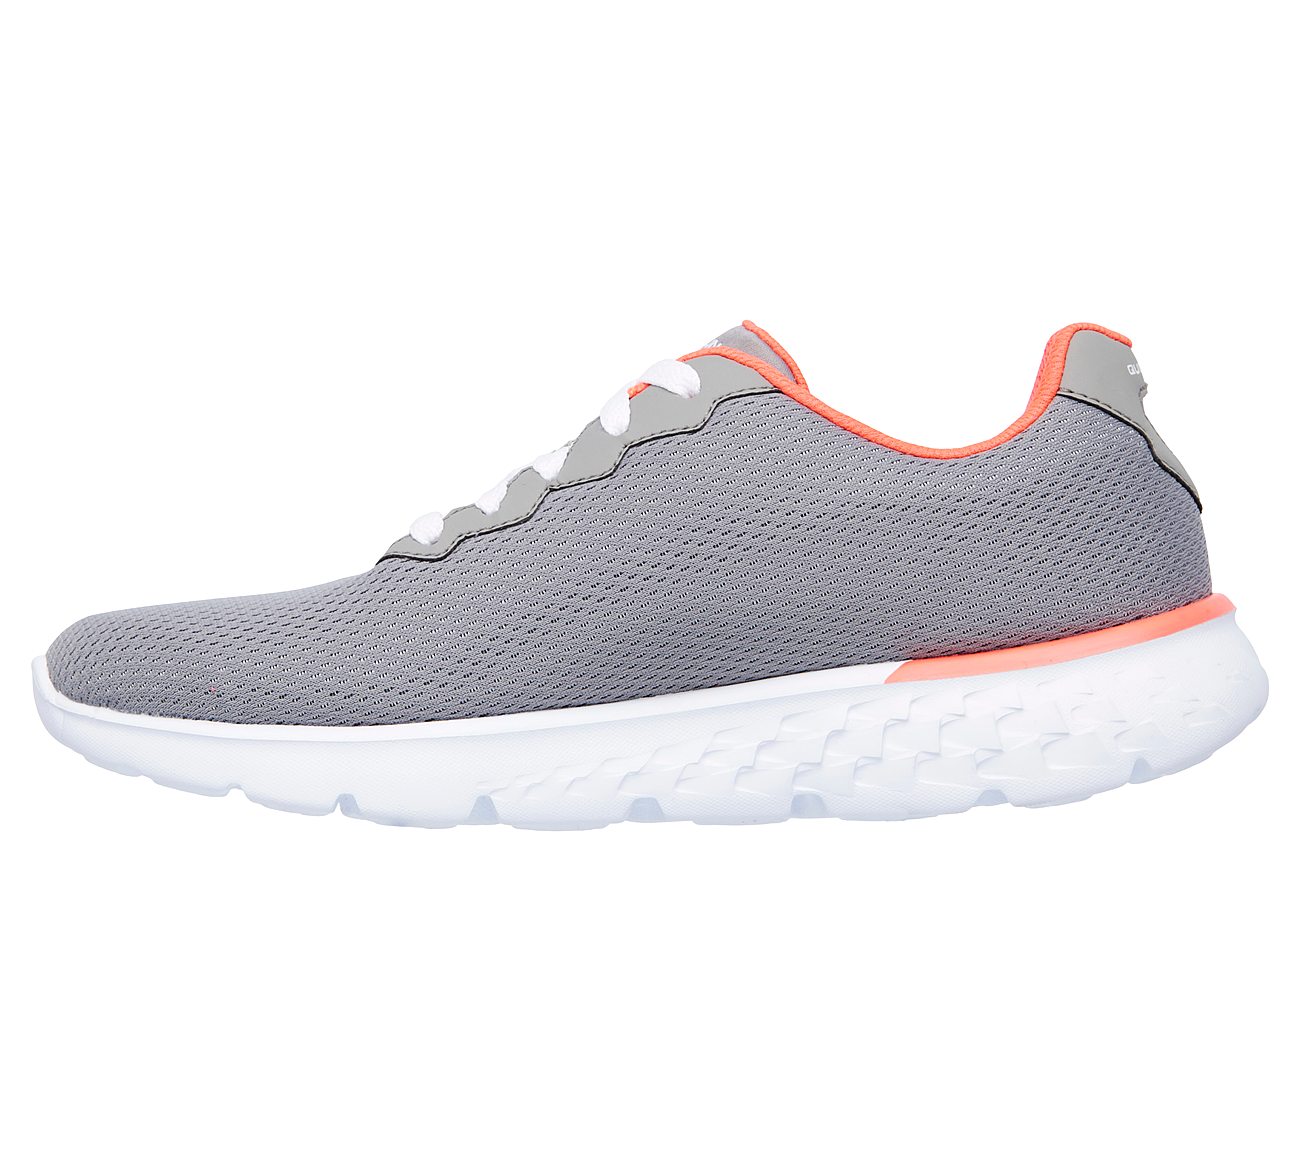 GO RUN 400 - ACTION, GREY/CORAL Footwear Left View